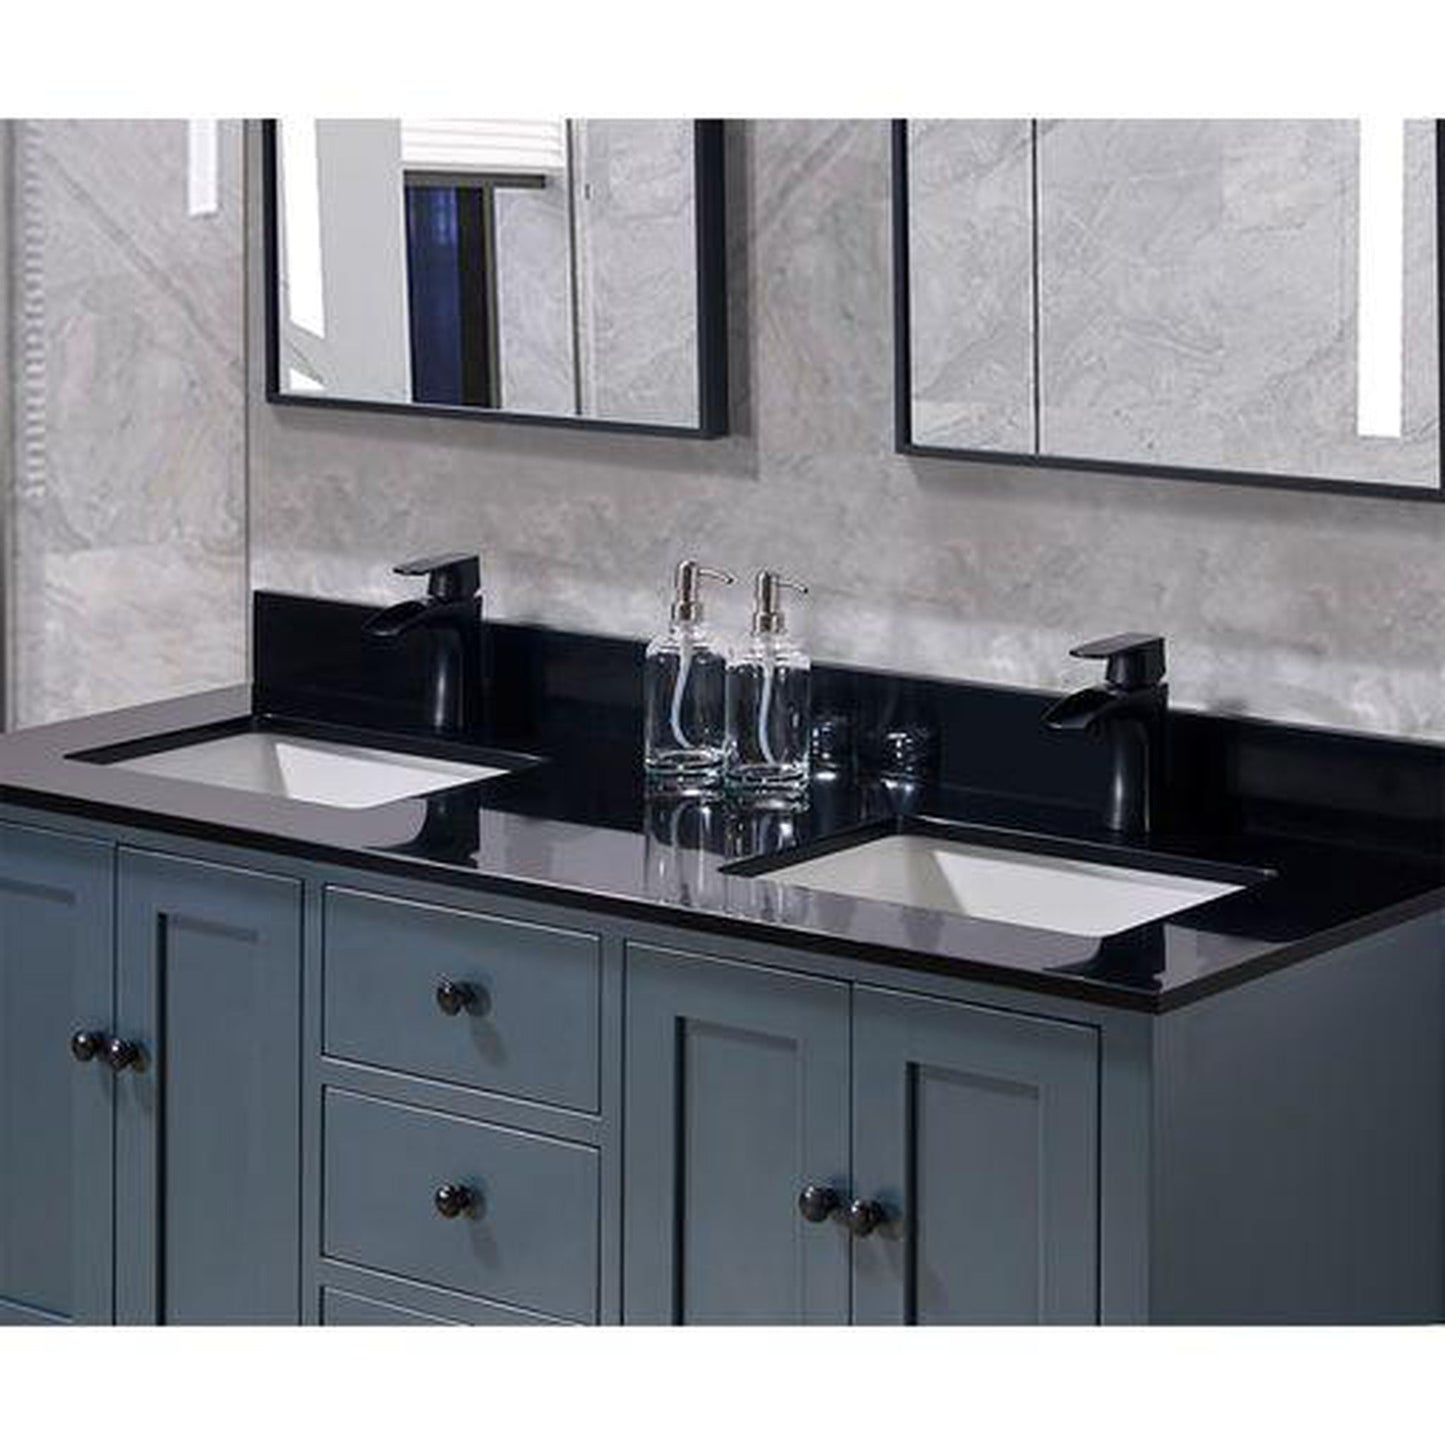 Altair Feltre 61" x 22" Imperial Black Composite Stone Bathroom Vanity Top With White SInk